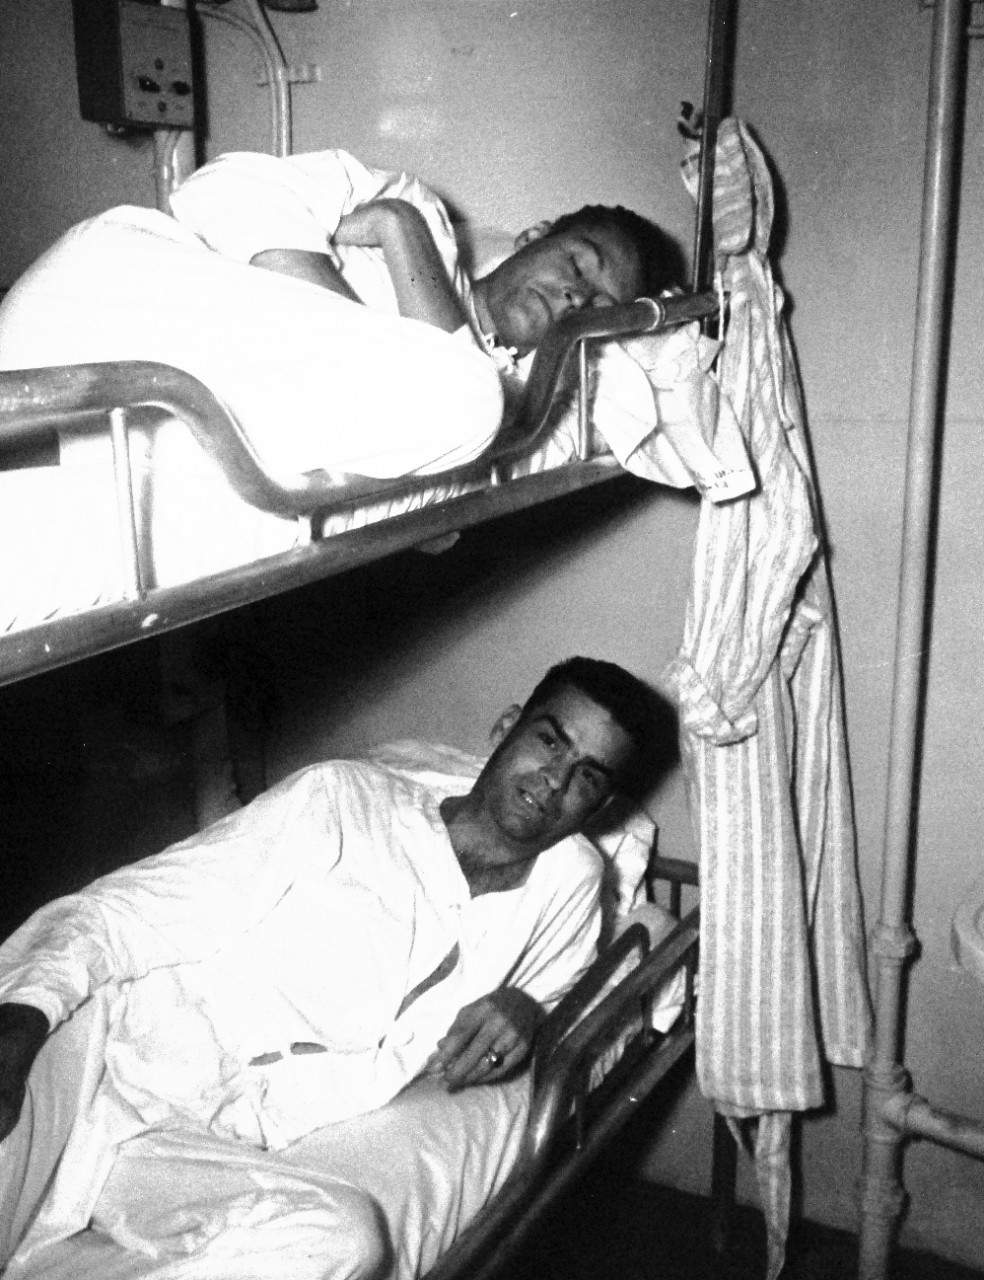 80-G-490454:  Allied. Prisoners of War, 1945.   USS Benevolence (AH-13).   U.S. Army B-29 pilots are rescued from prison camp.  Shown:   Colonel Richard H. Carmichael, upper bunk, and Colonel R.H. King, August 30, 1945.   Official U.S. Navy photograph, now in the collections of the National Archives.  (2014/05/29).    The original is a small photograph.   